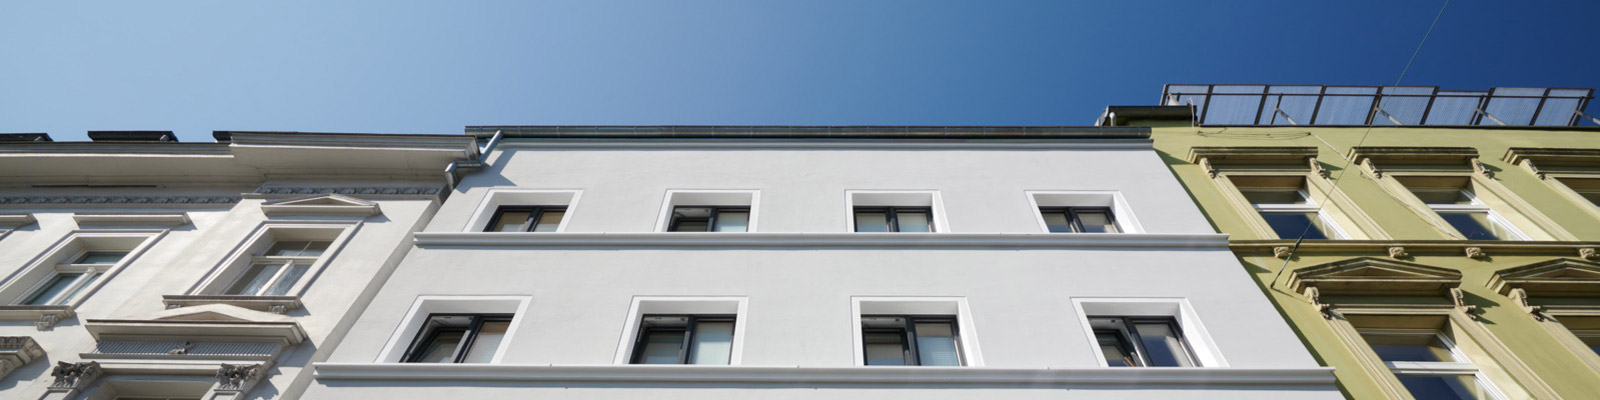 Residential building, Wuppertal